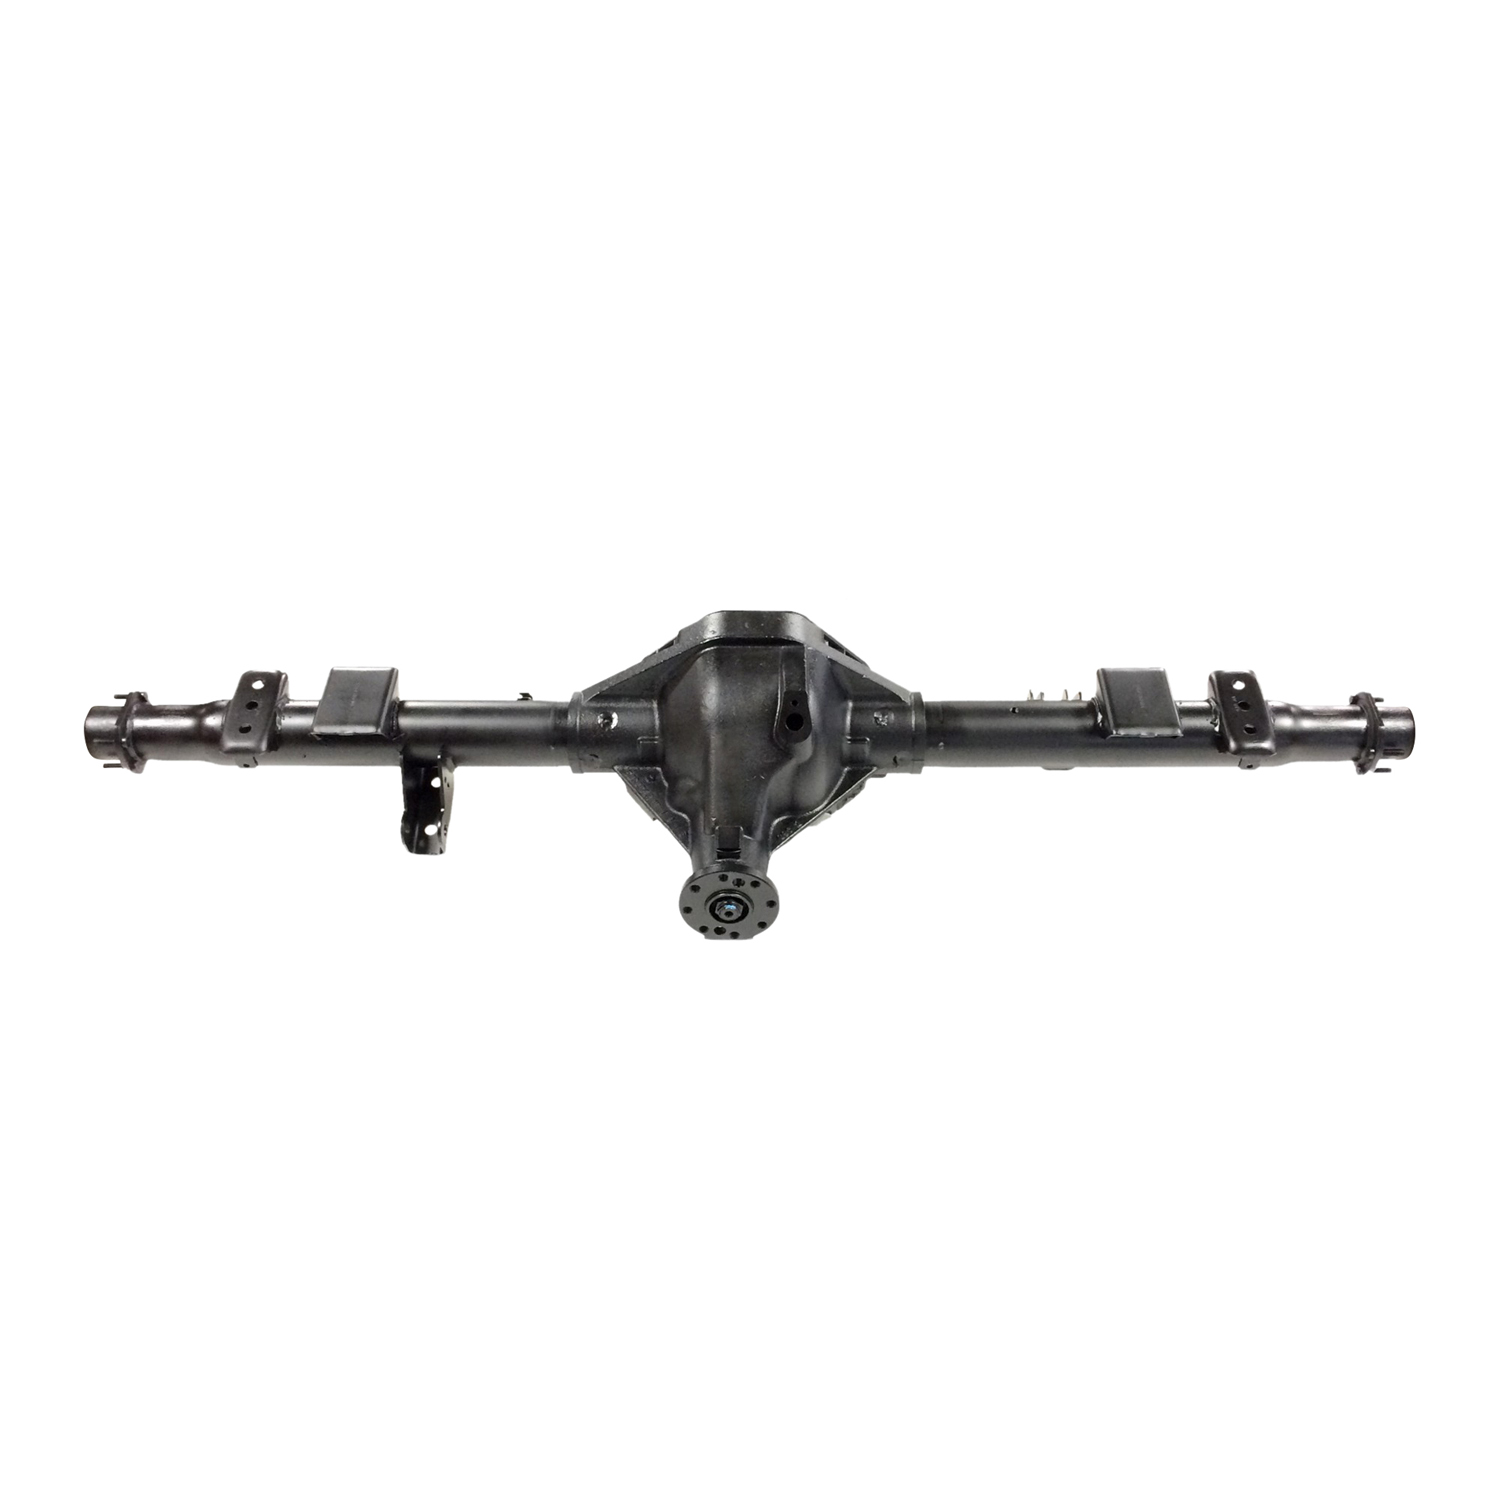 Remanufactured Complete Axle Assembly for Chy 9.25" 02-05 D1500 3.55 , 2wd, Posi LSD